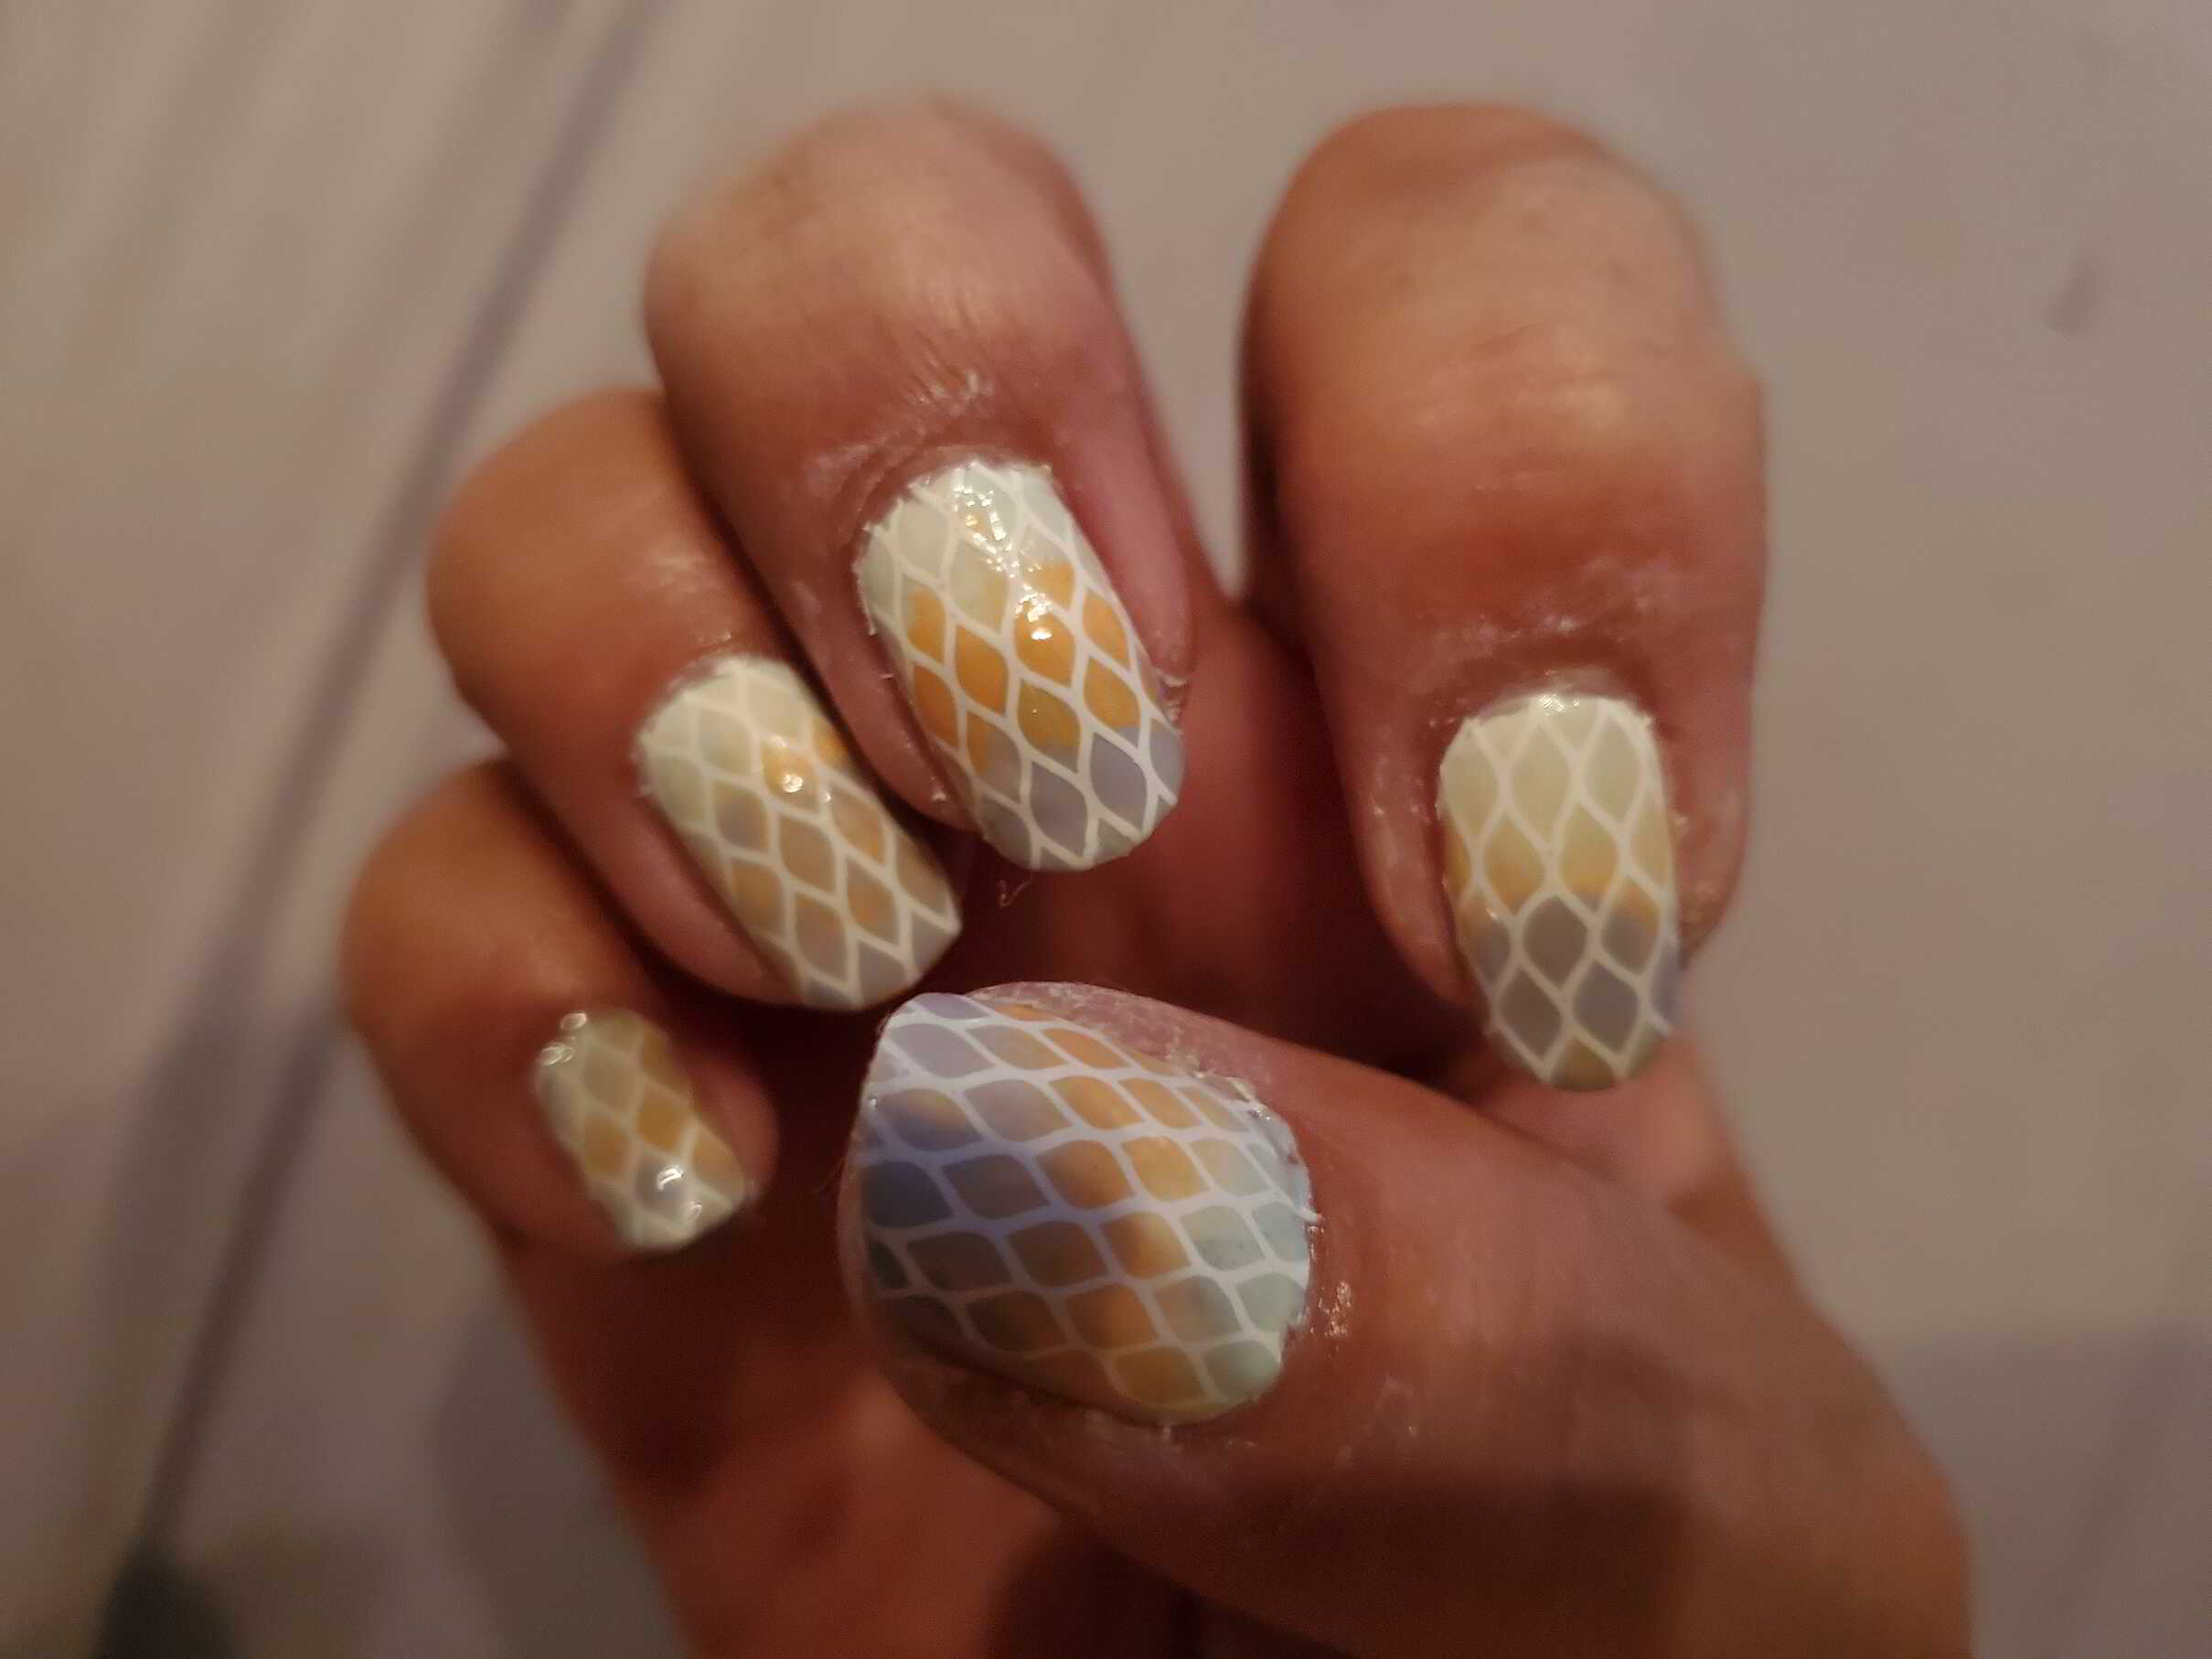 Nail polish manicure of shade Static Nails Peachy Keen, Orly Forget Me Not,Static Nails Lavender Fields,Maniology The Nailasaurus,Maniology Bam White